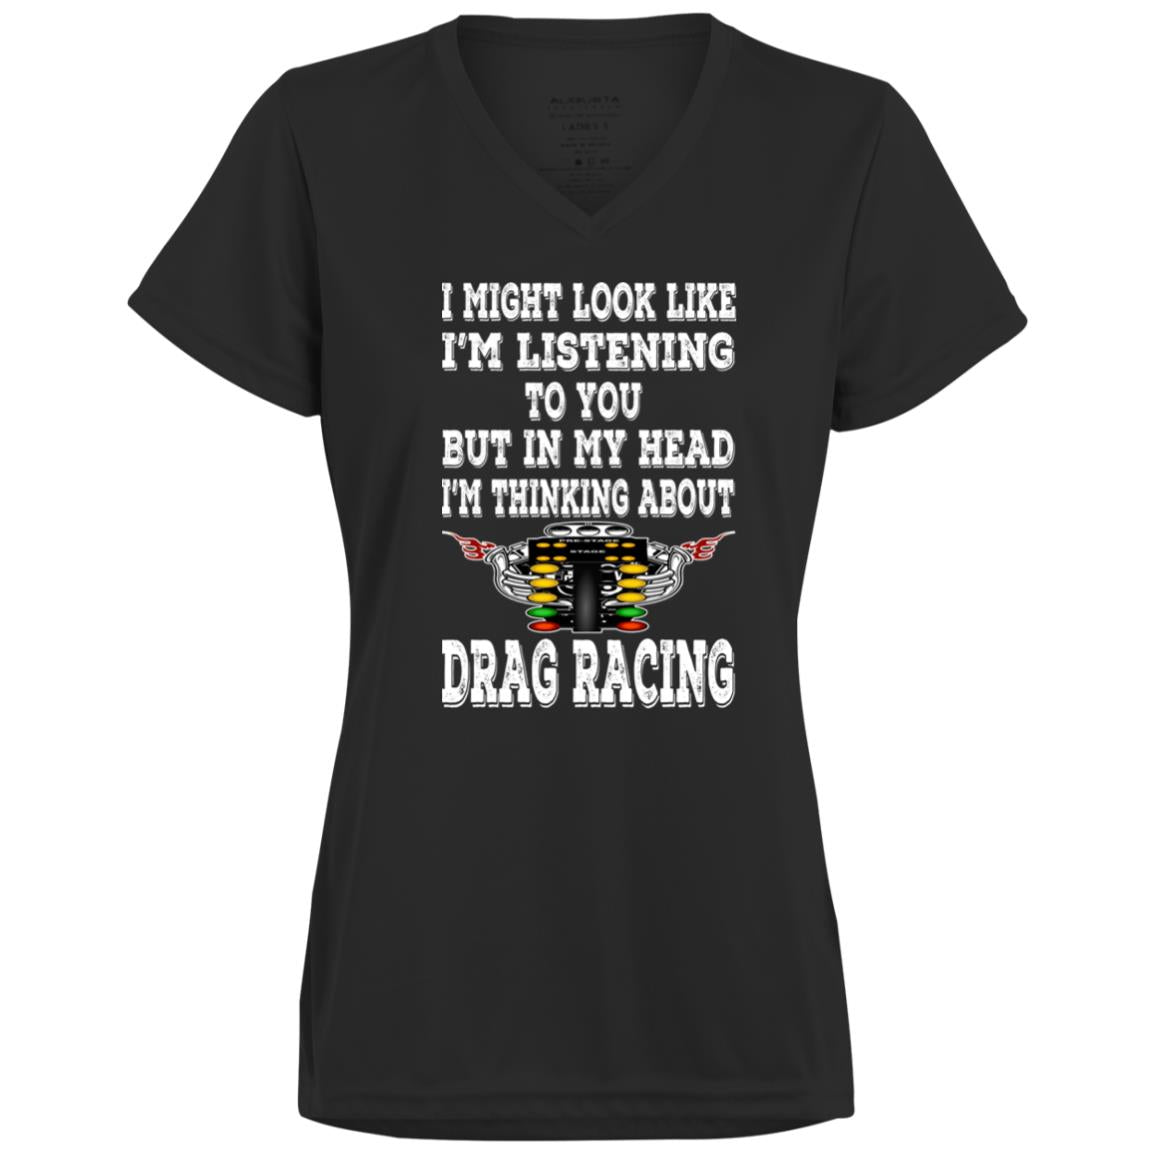 I Might look Like I'm Listening To You Drag Racing Ladies’ Moisture-Wicking V-Neck Tee